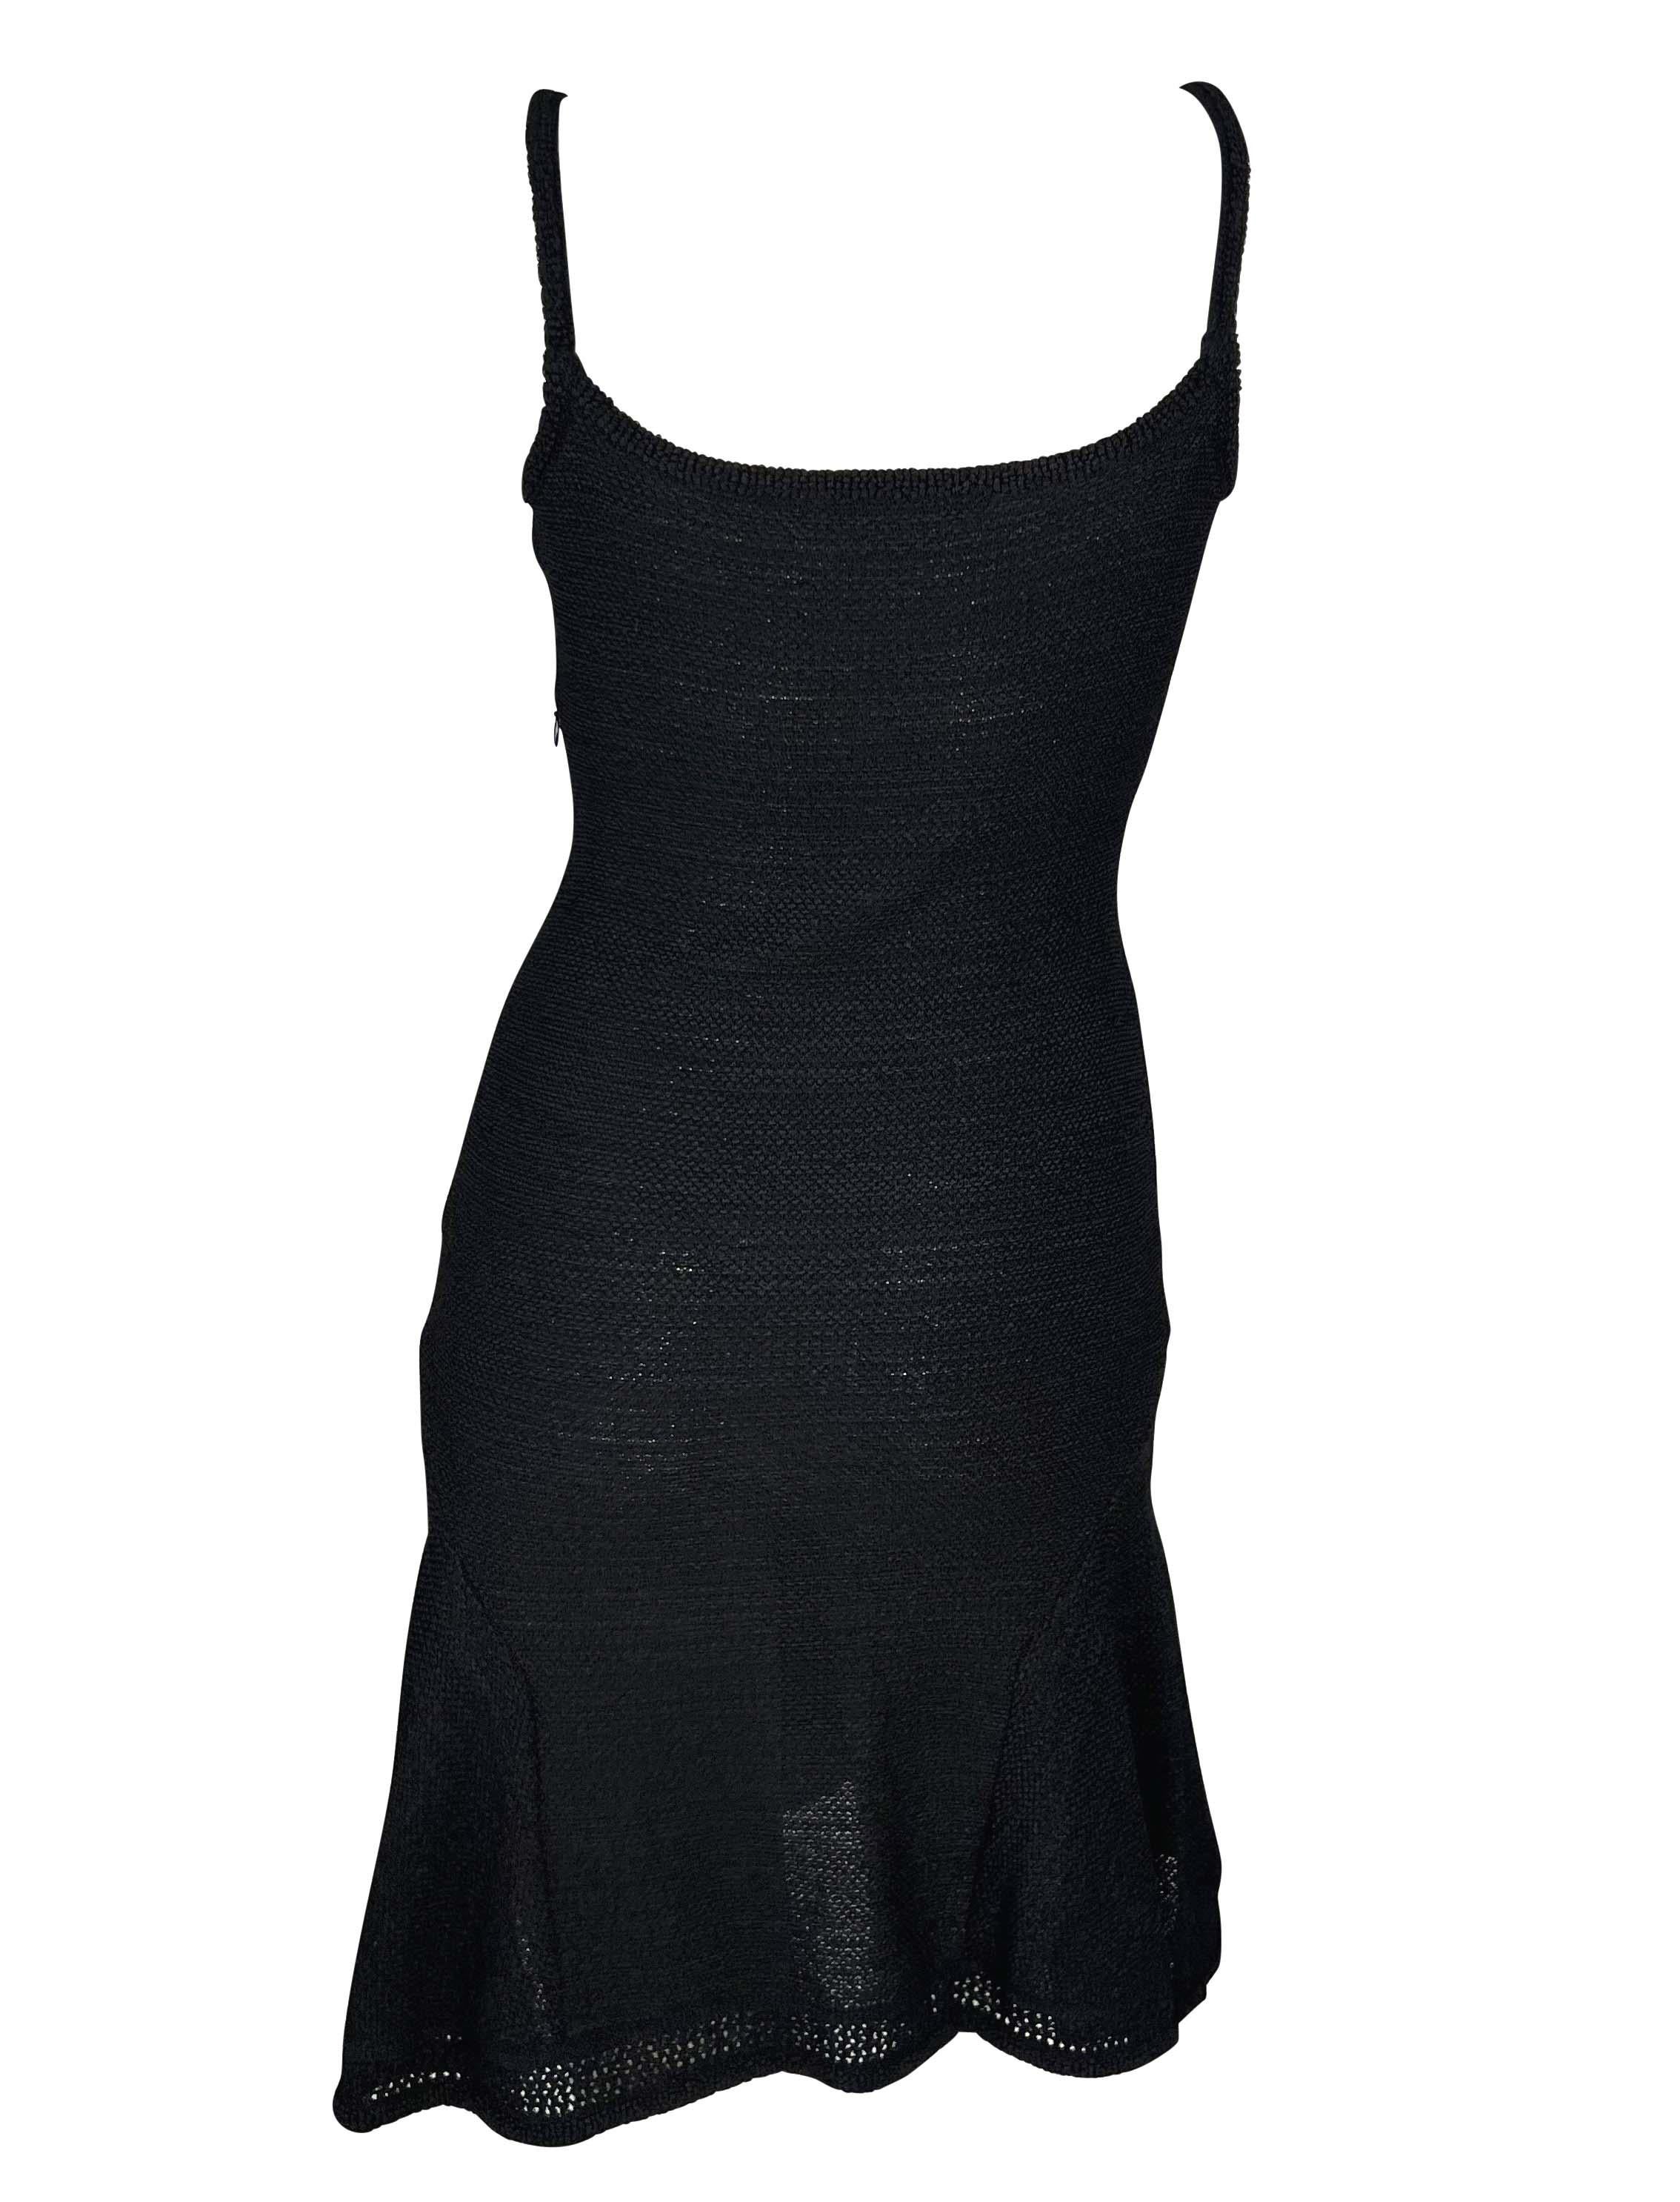 S/S 1999 John Galliano Stretch Knit Sheer Flare Black Sweater Dress In Good Condition For Sale In West Hollywood, CA